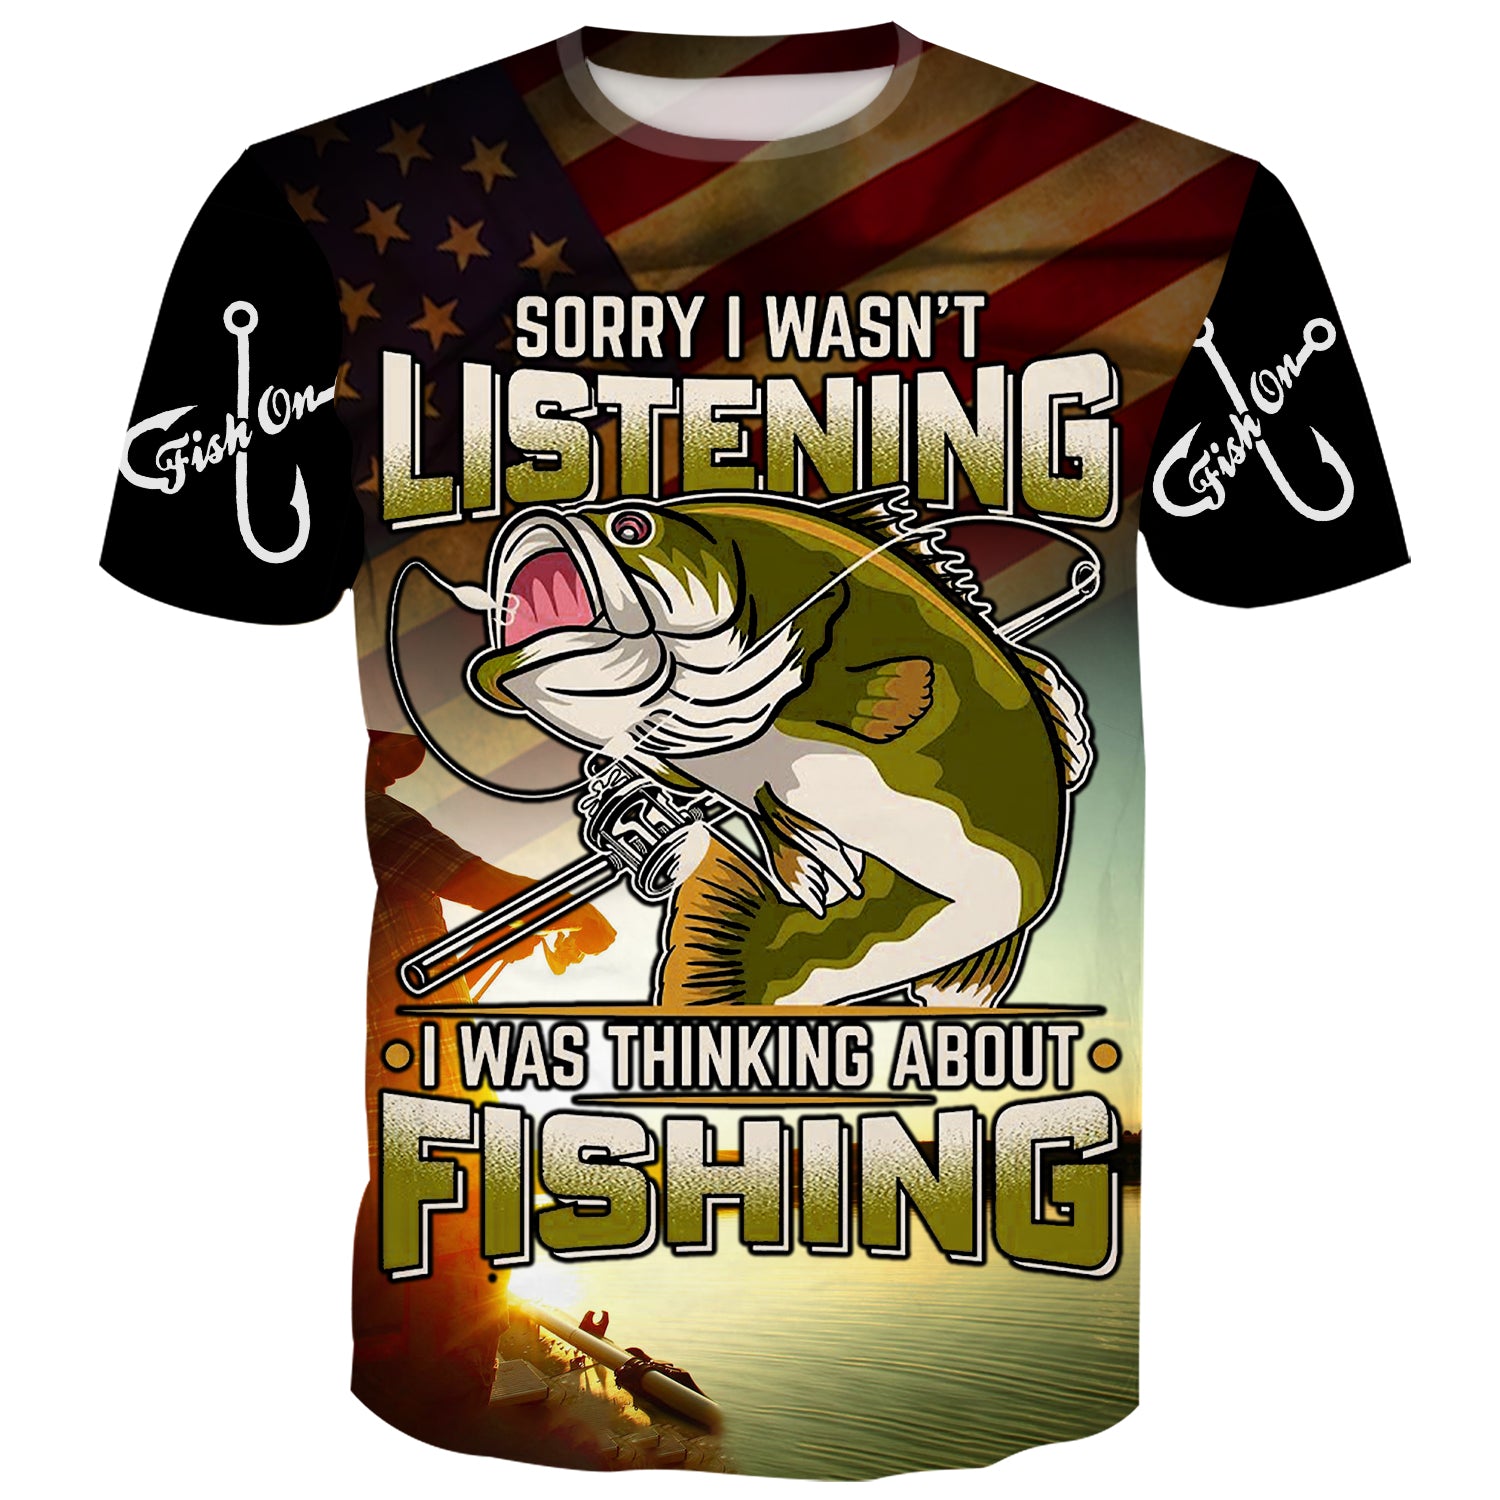 Sorry I wan't Listening, I was talking about Fishing - T-Shirt